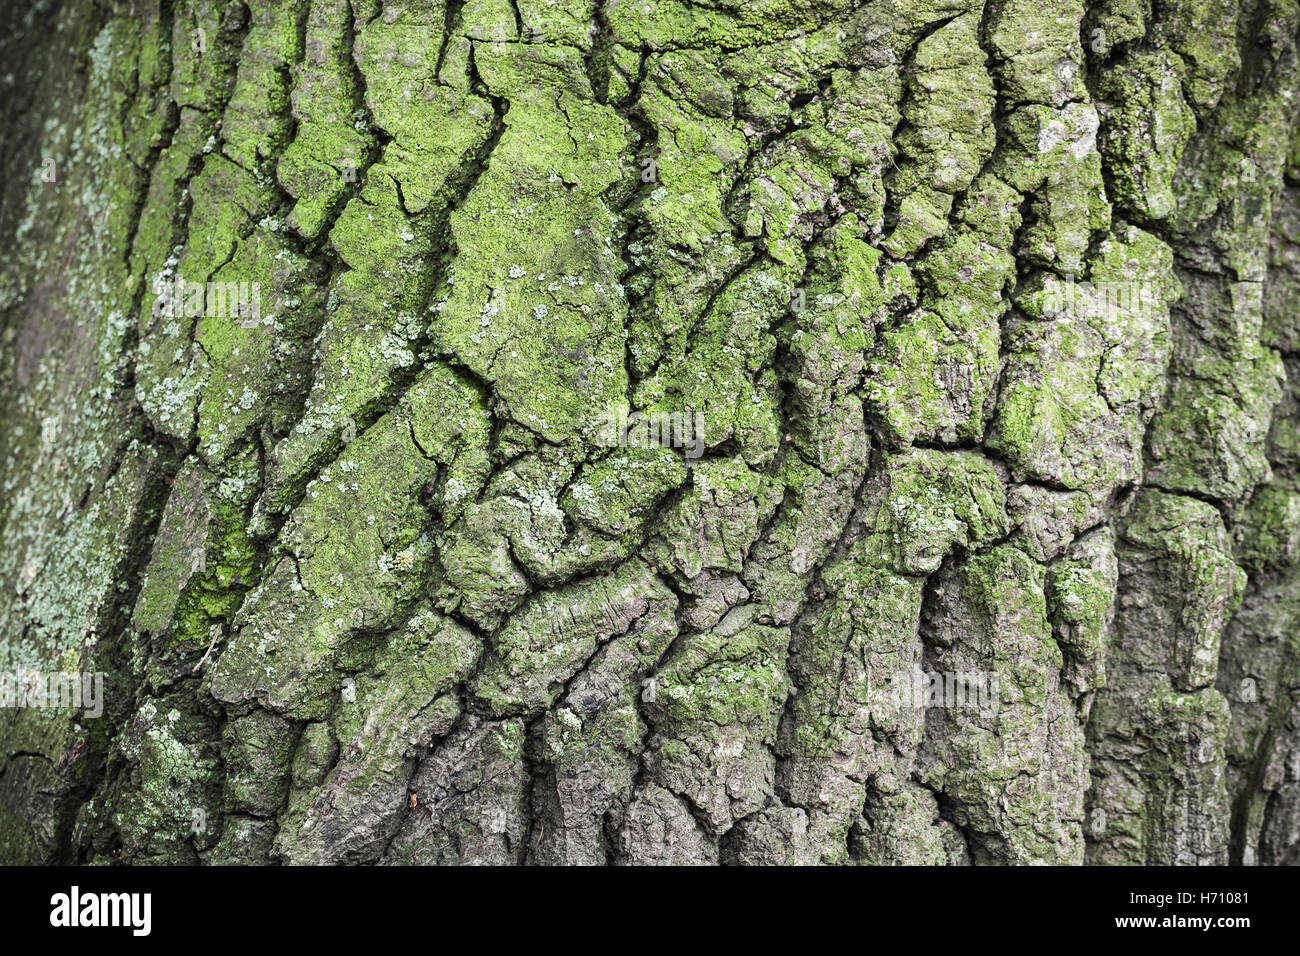 Old tree bark with green lichen, natural close-up background texture Stock Photo